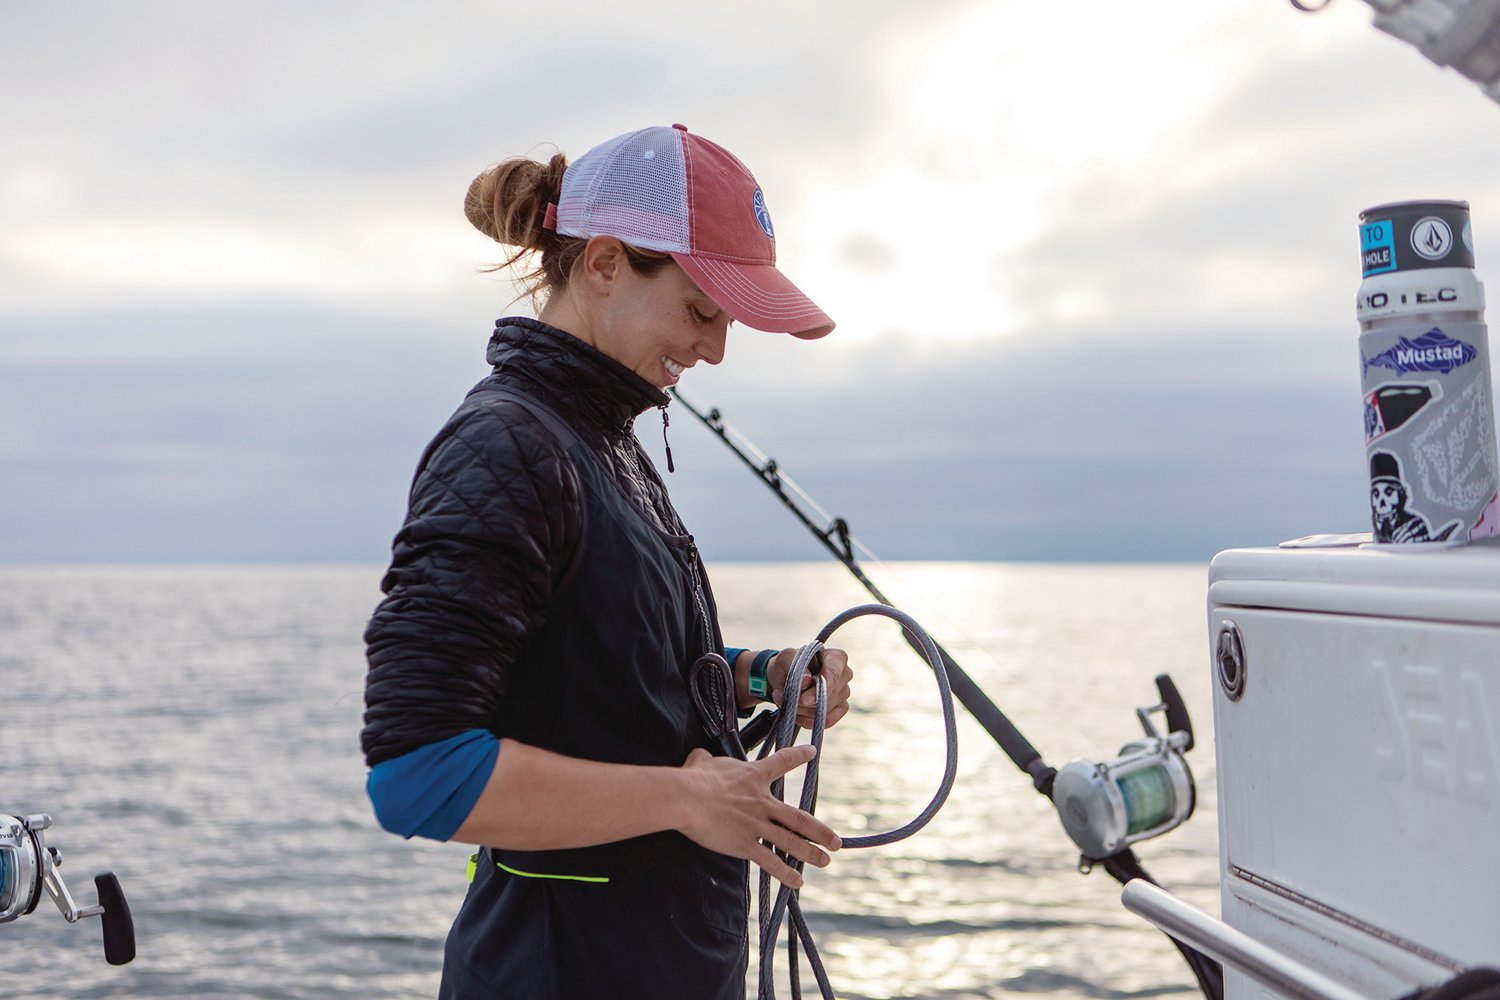 RESETTING GEAR: De Silva resets gear after safely and humanely catching and satellite tagging a 9-foot porbeagle shark 25 miles off Cape Cod.